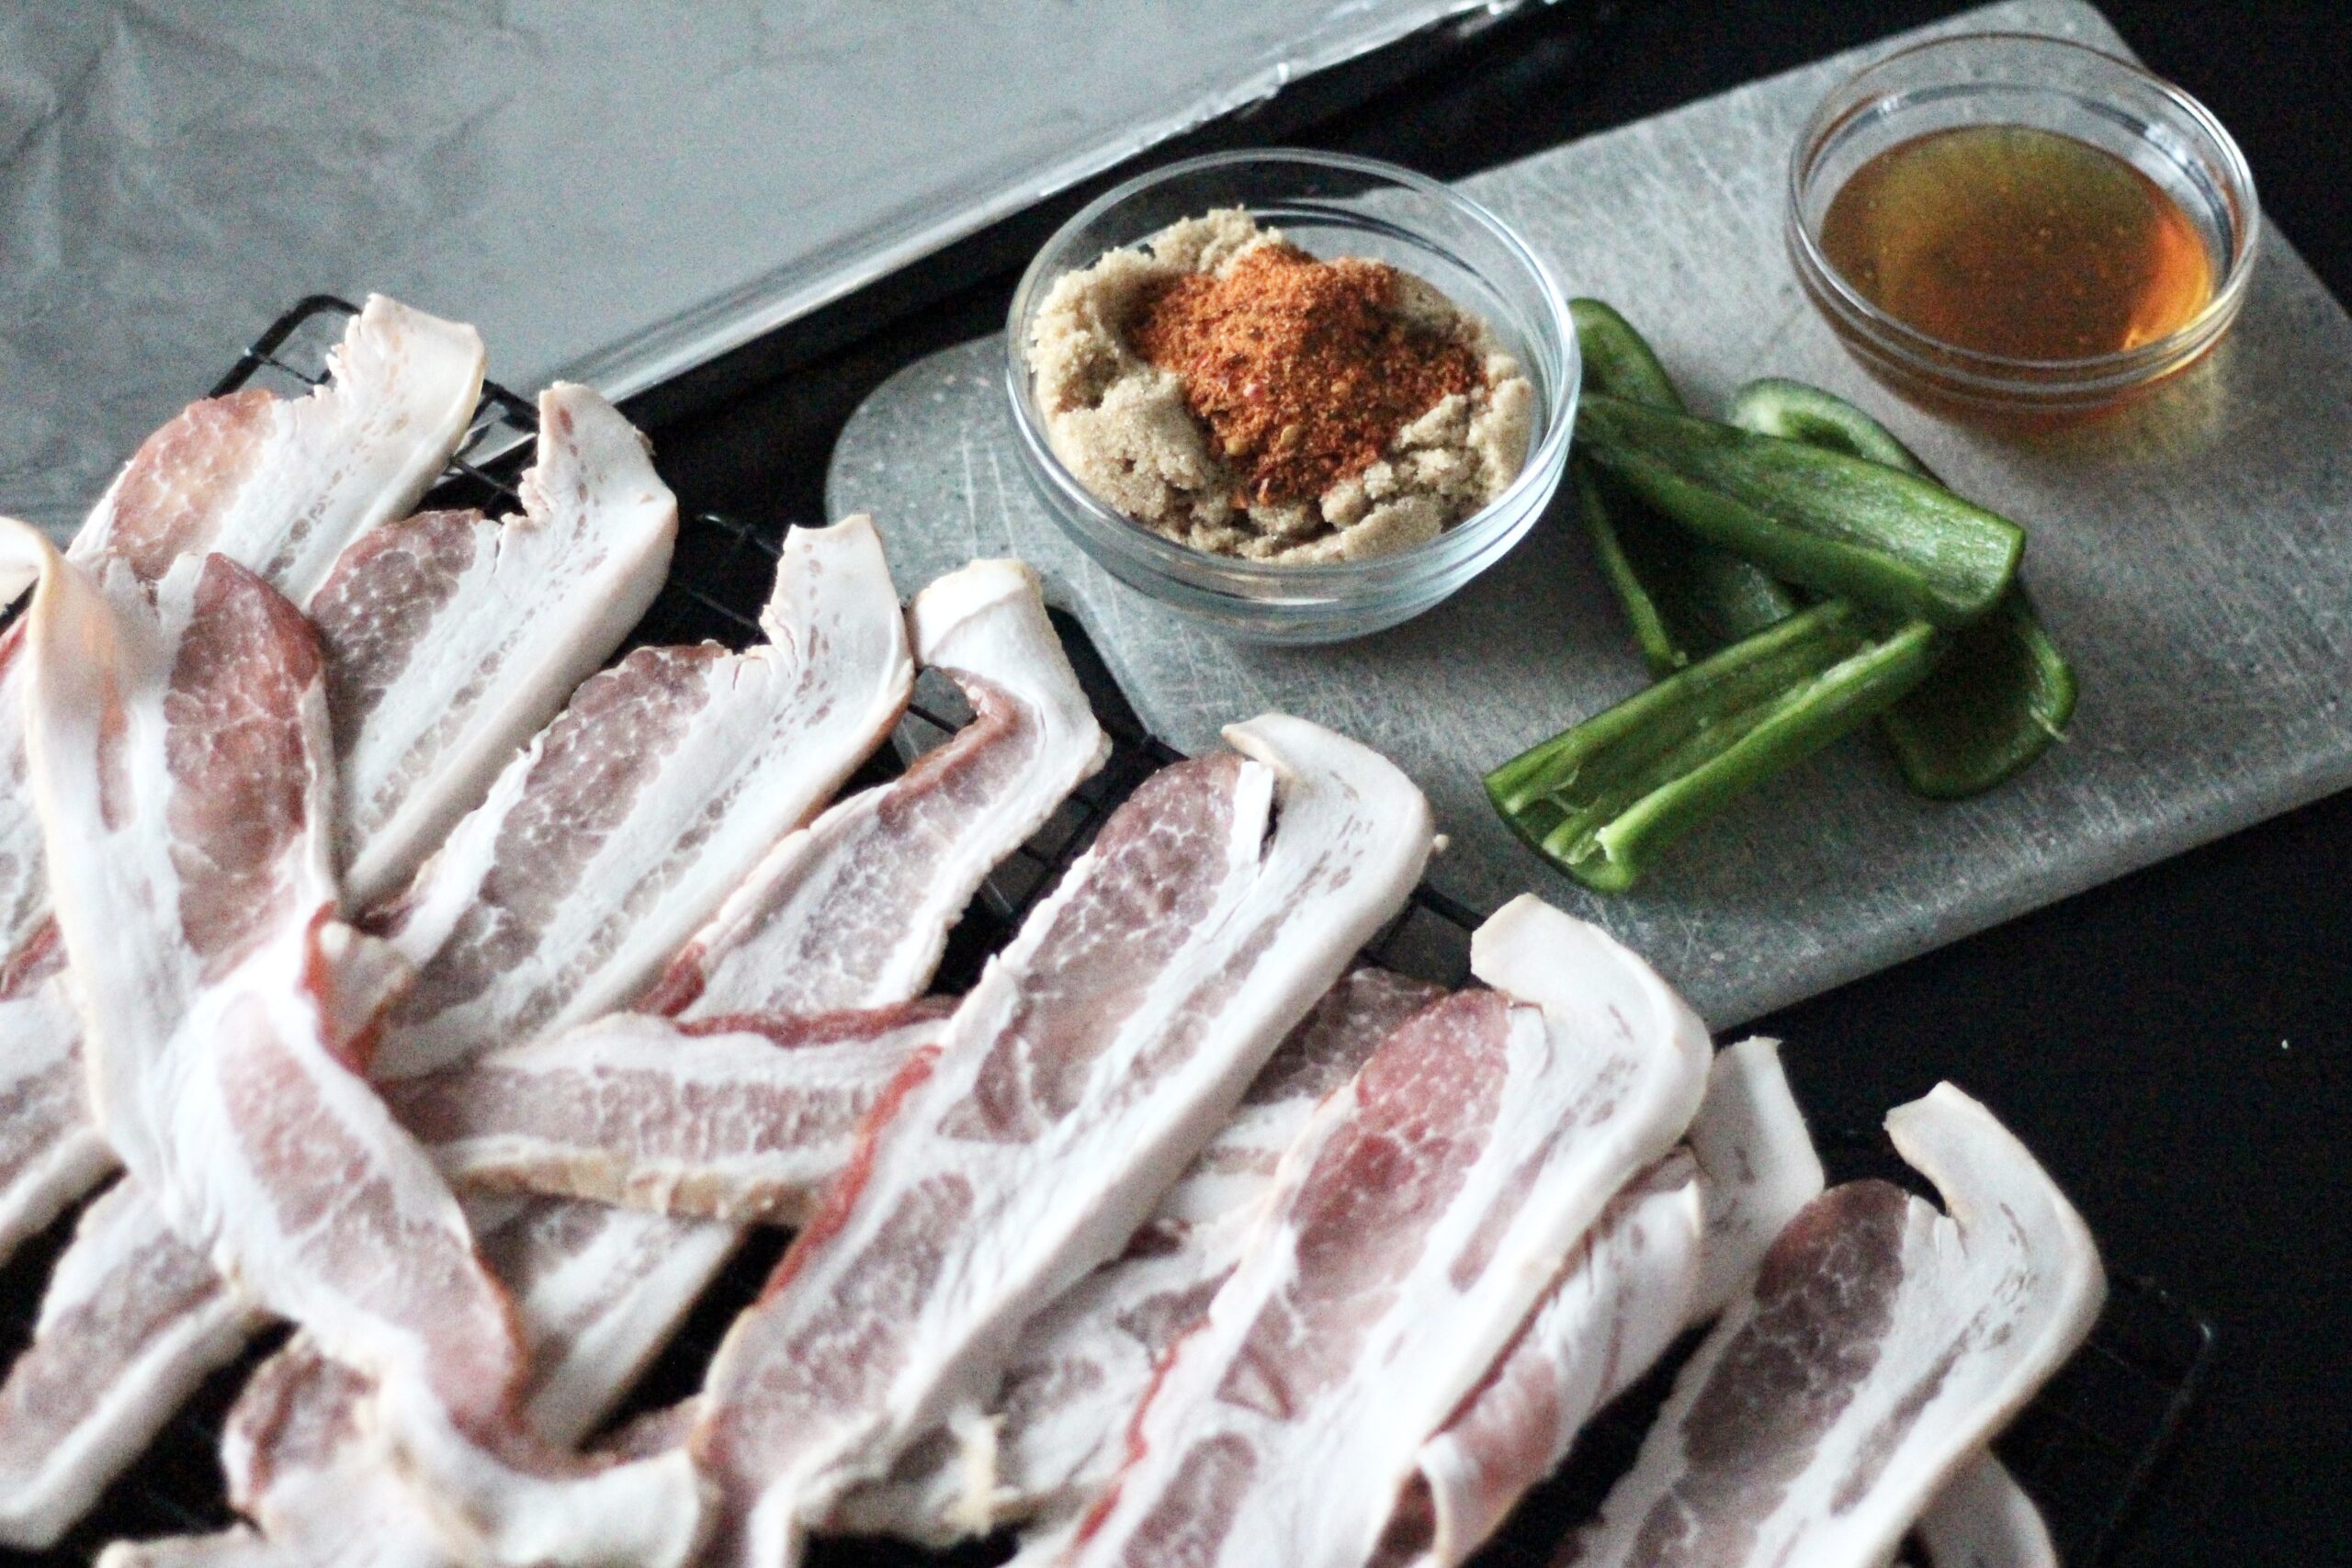 Raw bacon strips on a table with other ingredients